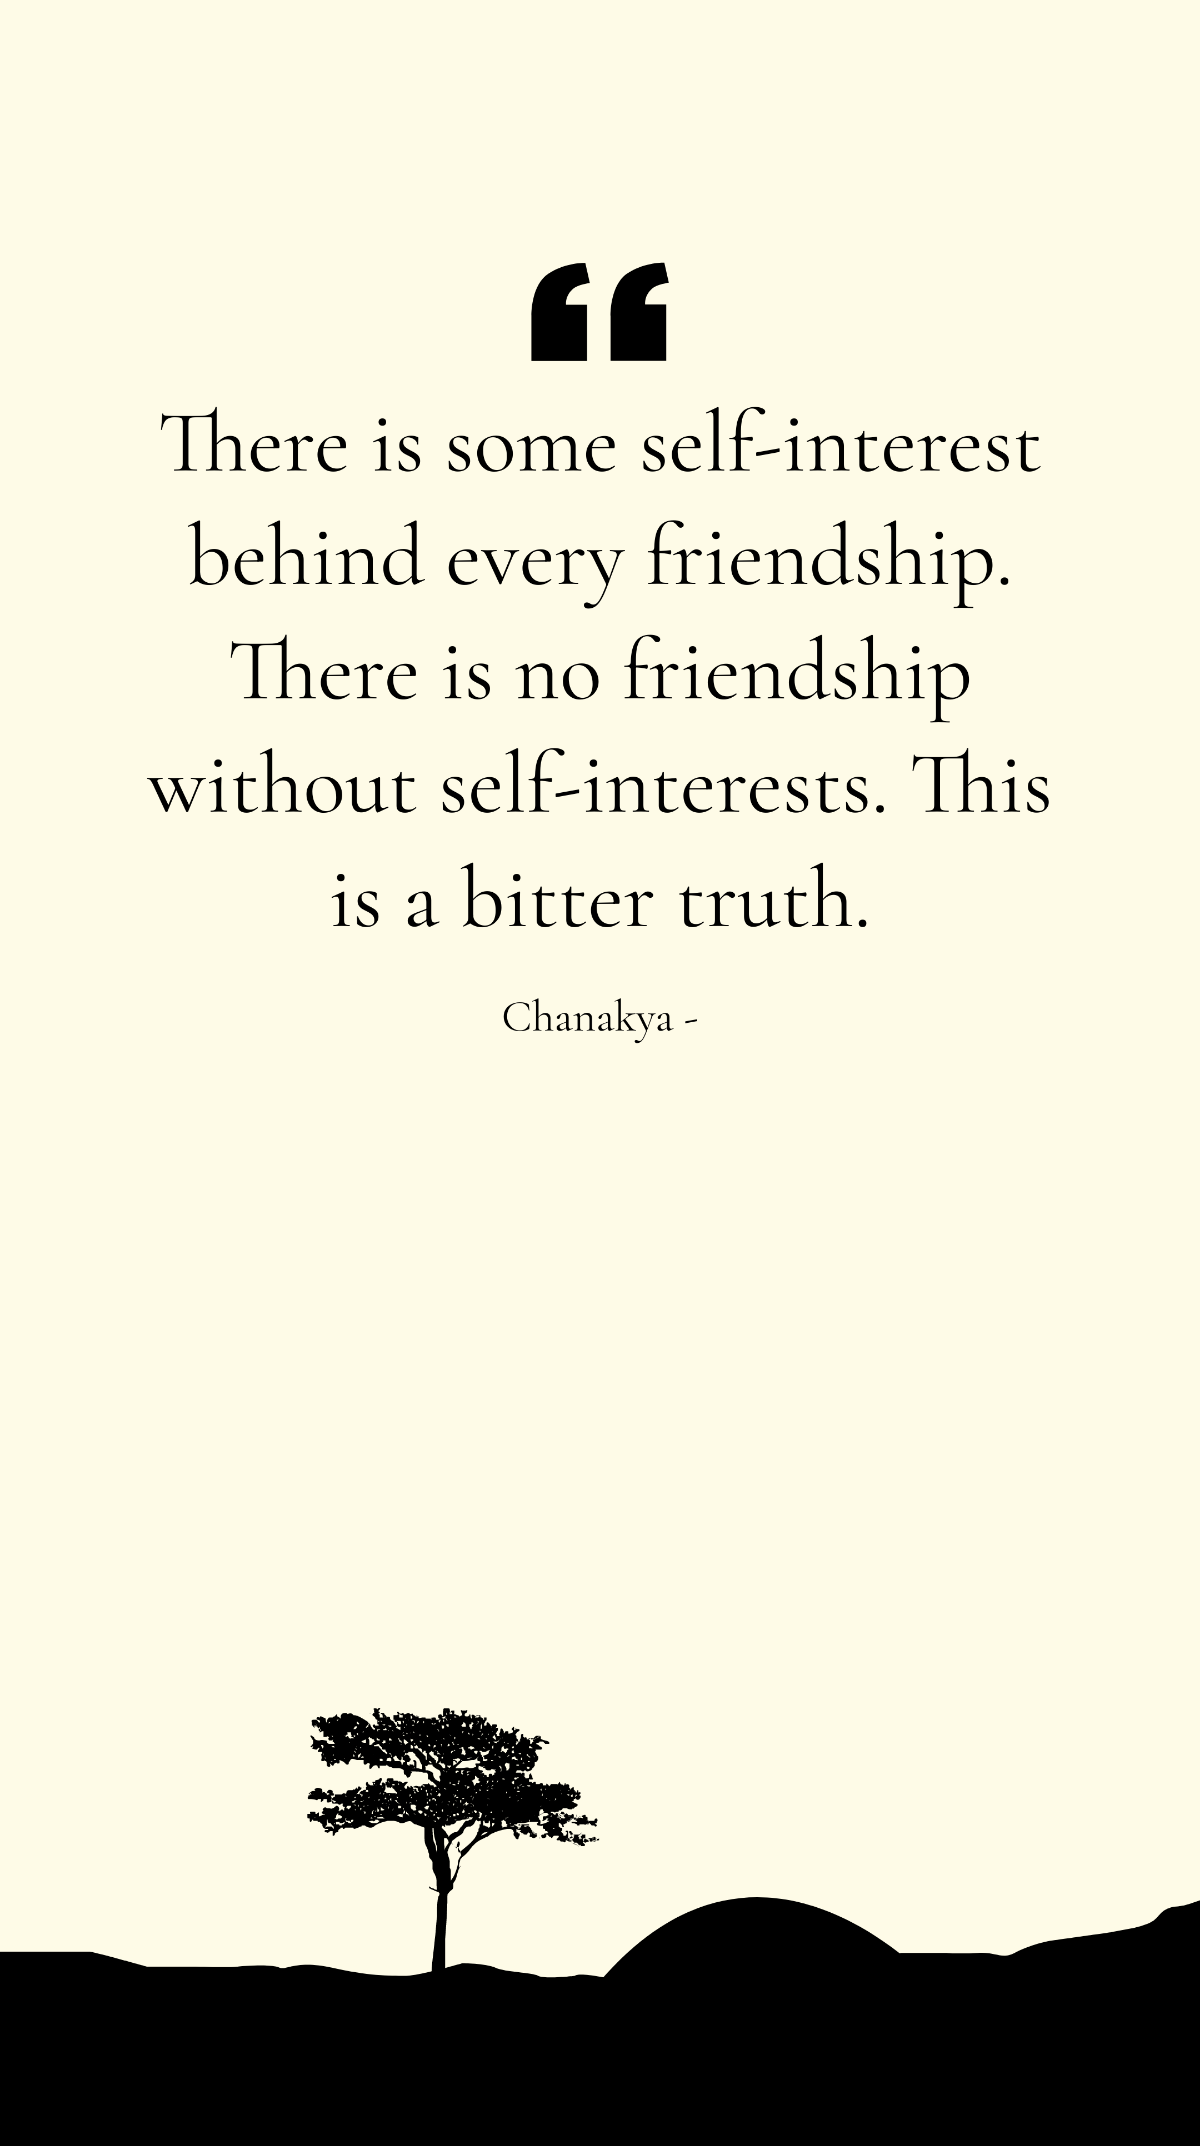 Chanakya - There is some self-interest behind every friendship. There is no friendship without self-interests. This is a bitter truth. Template